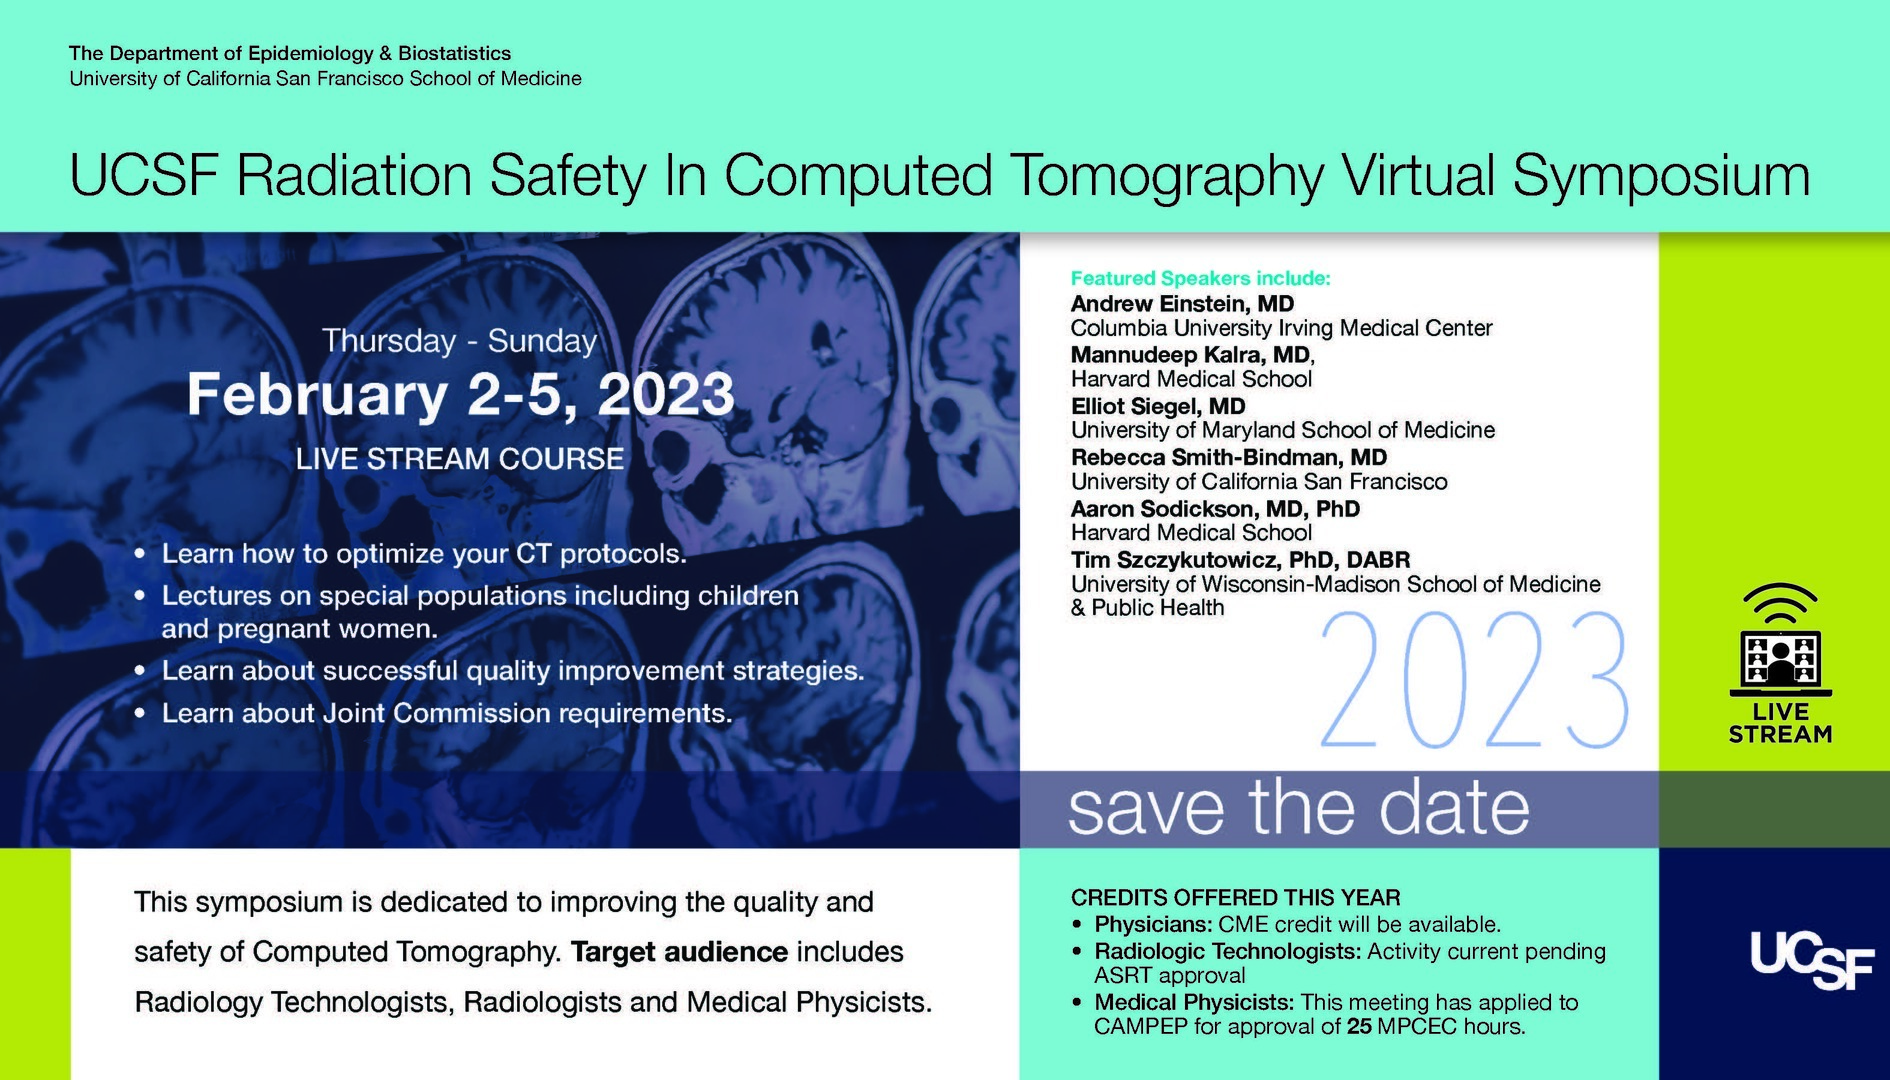 UCSF Radiation Safety In Computed Tomography Virtual Symposium